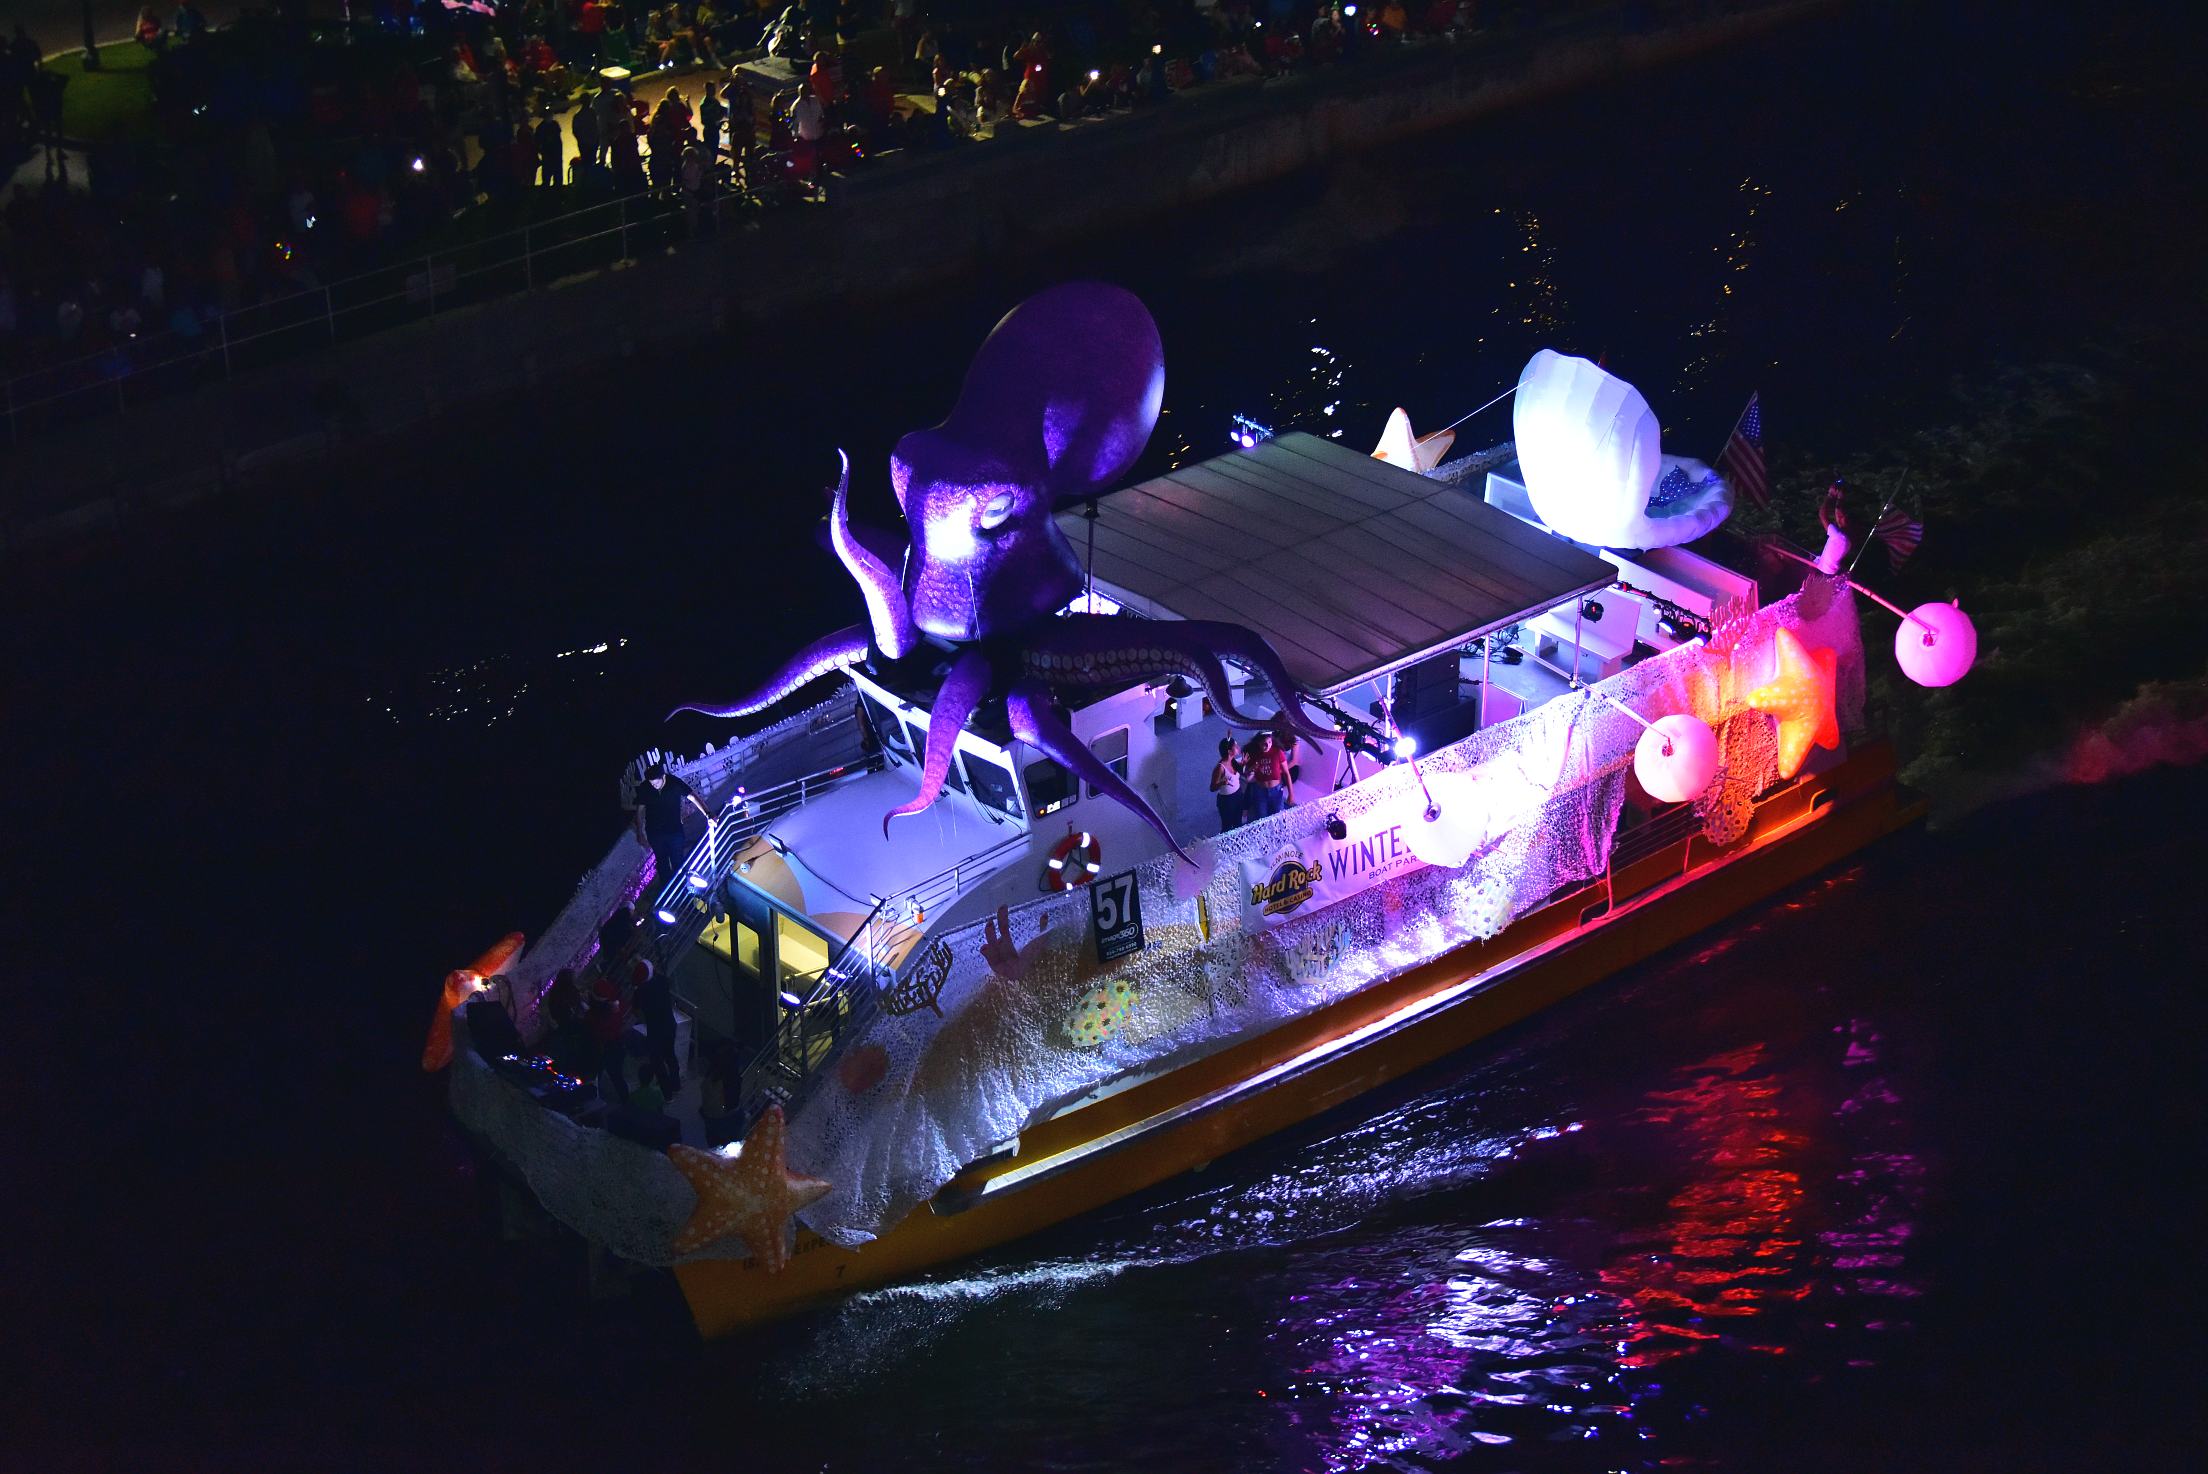 Under The Sea on board Water Taxi, boat number 57 in the 2021 Winterfest Boat Parade